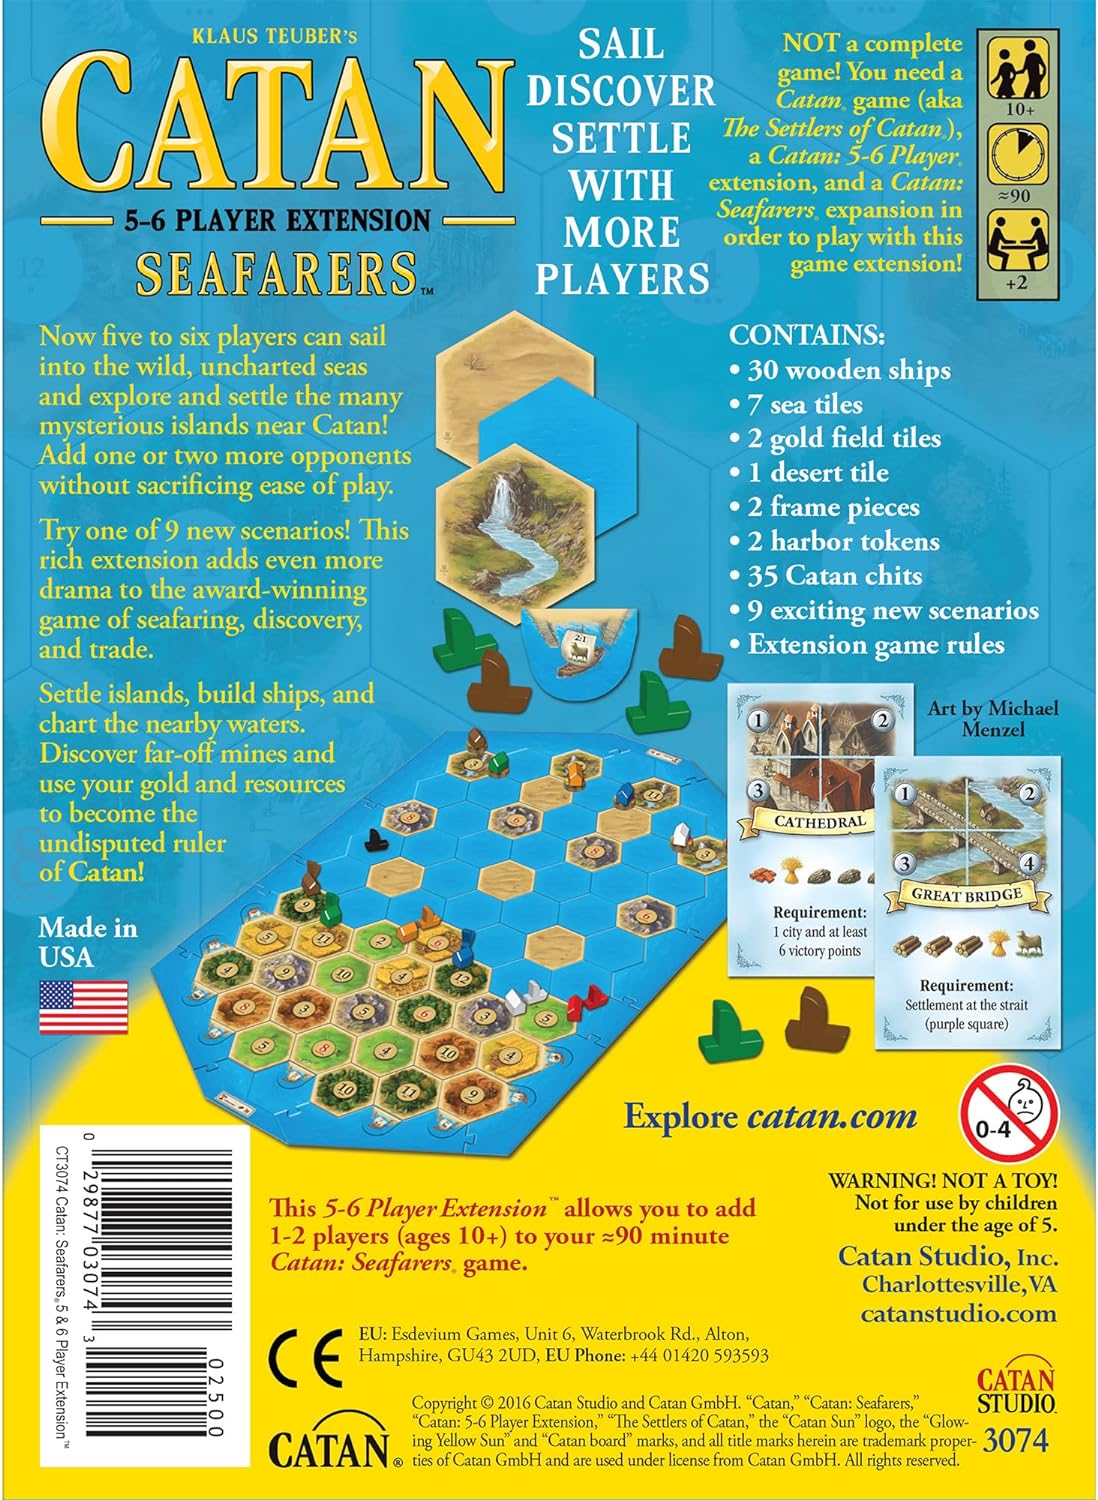 Catan Seafarer 5-6 Player Extension board game tabletop game